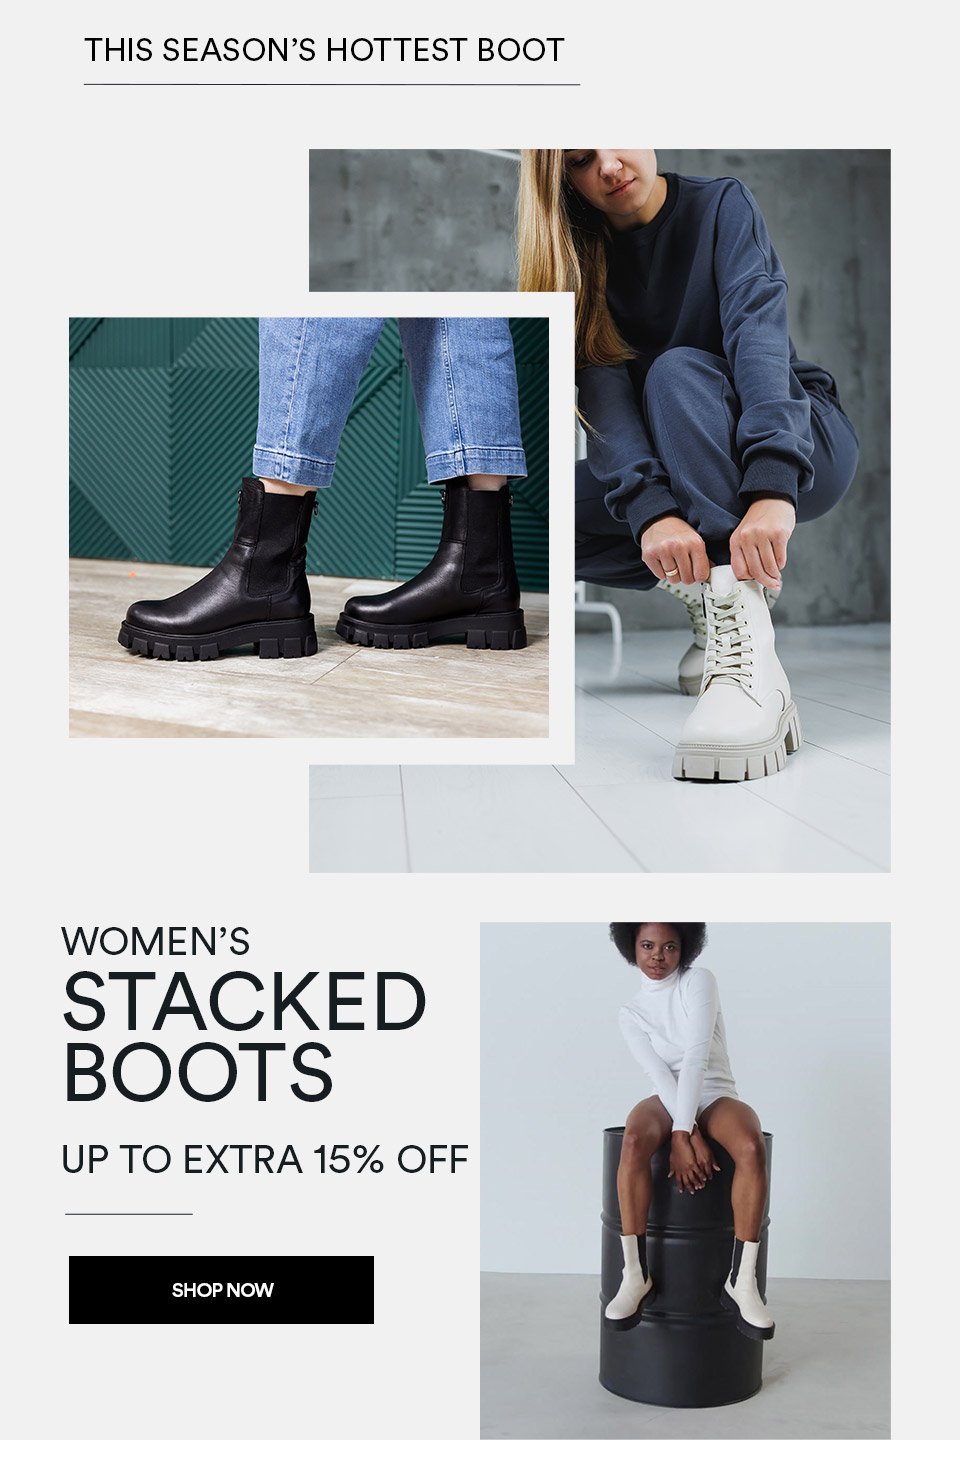 WOMEN'S STACKED BOOTS UP TO EXTRA 15% OFF